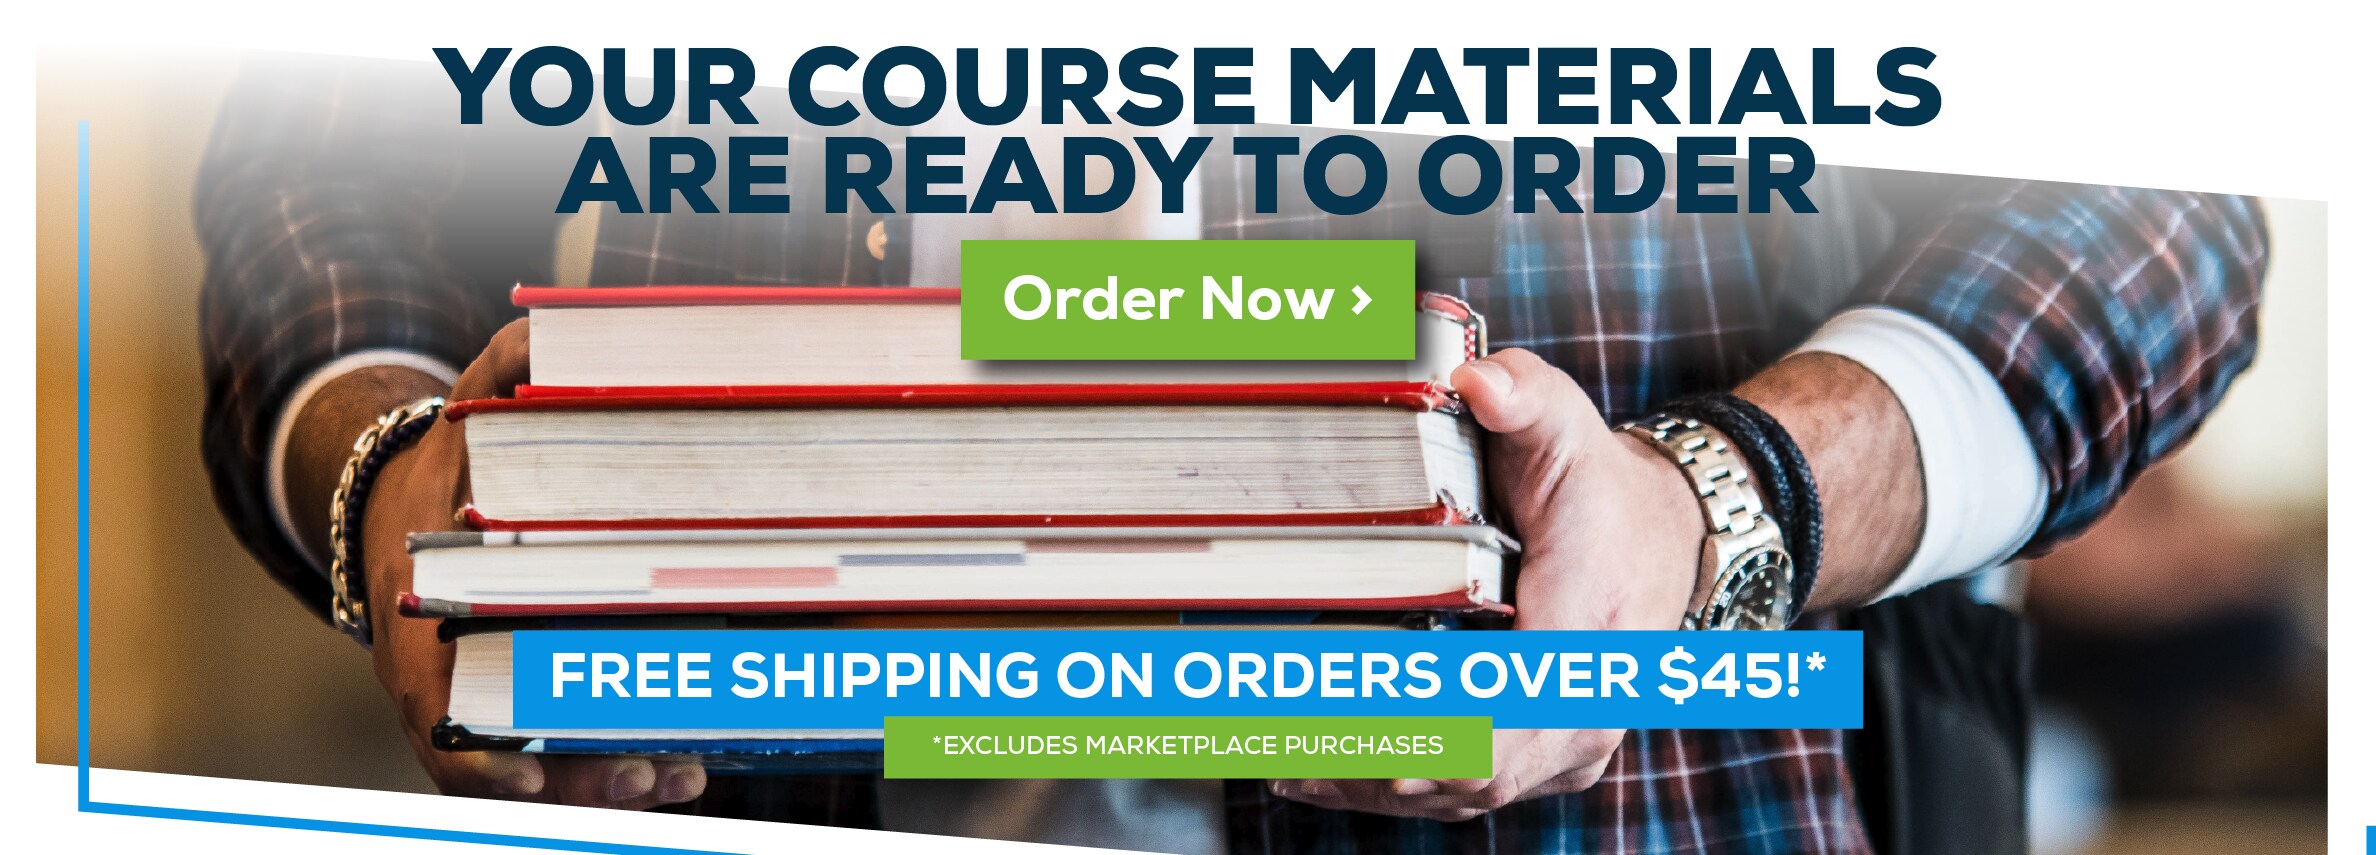 Your Course Materials are Ready to Order. Order Now. Free shipping on orders over $45! *Excludes marketplace purchases.